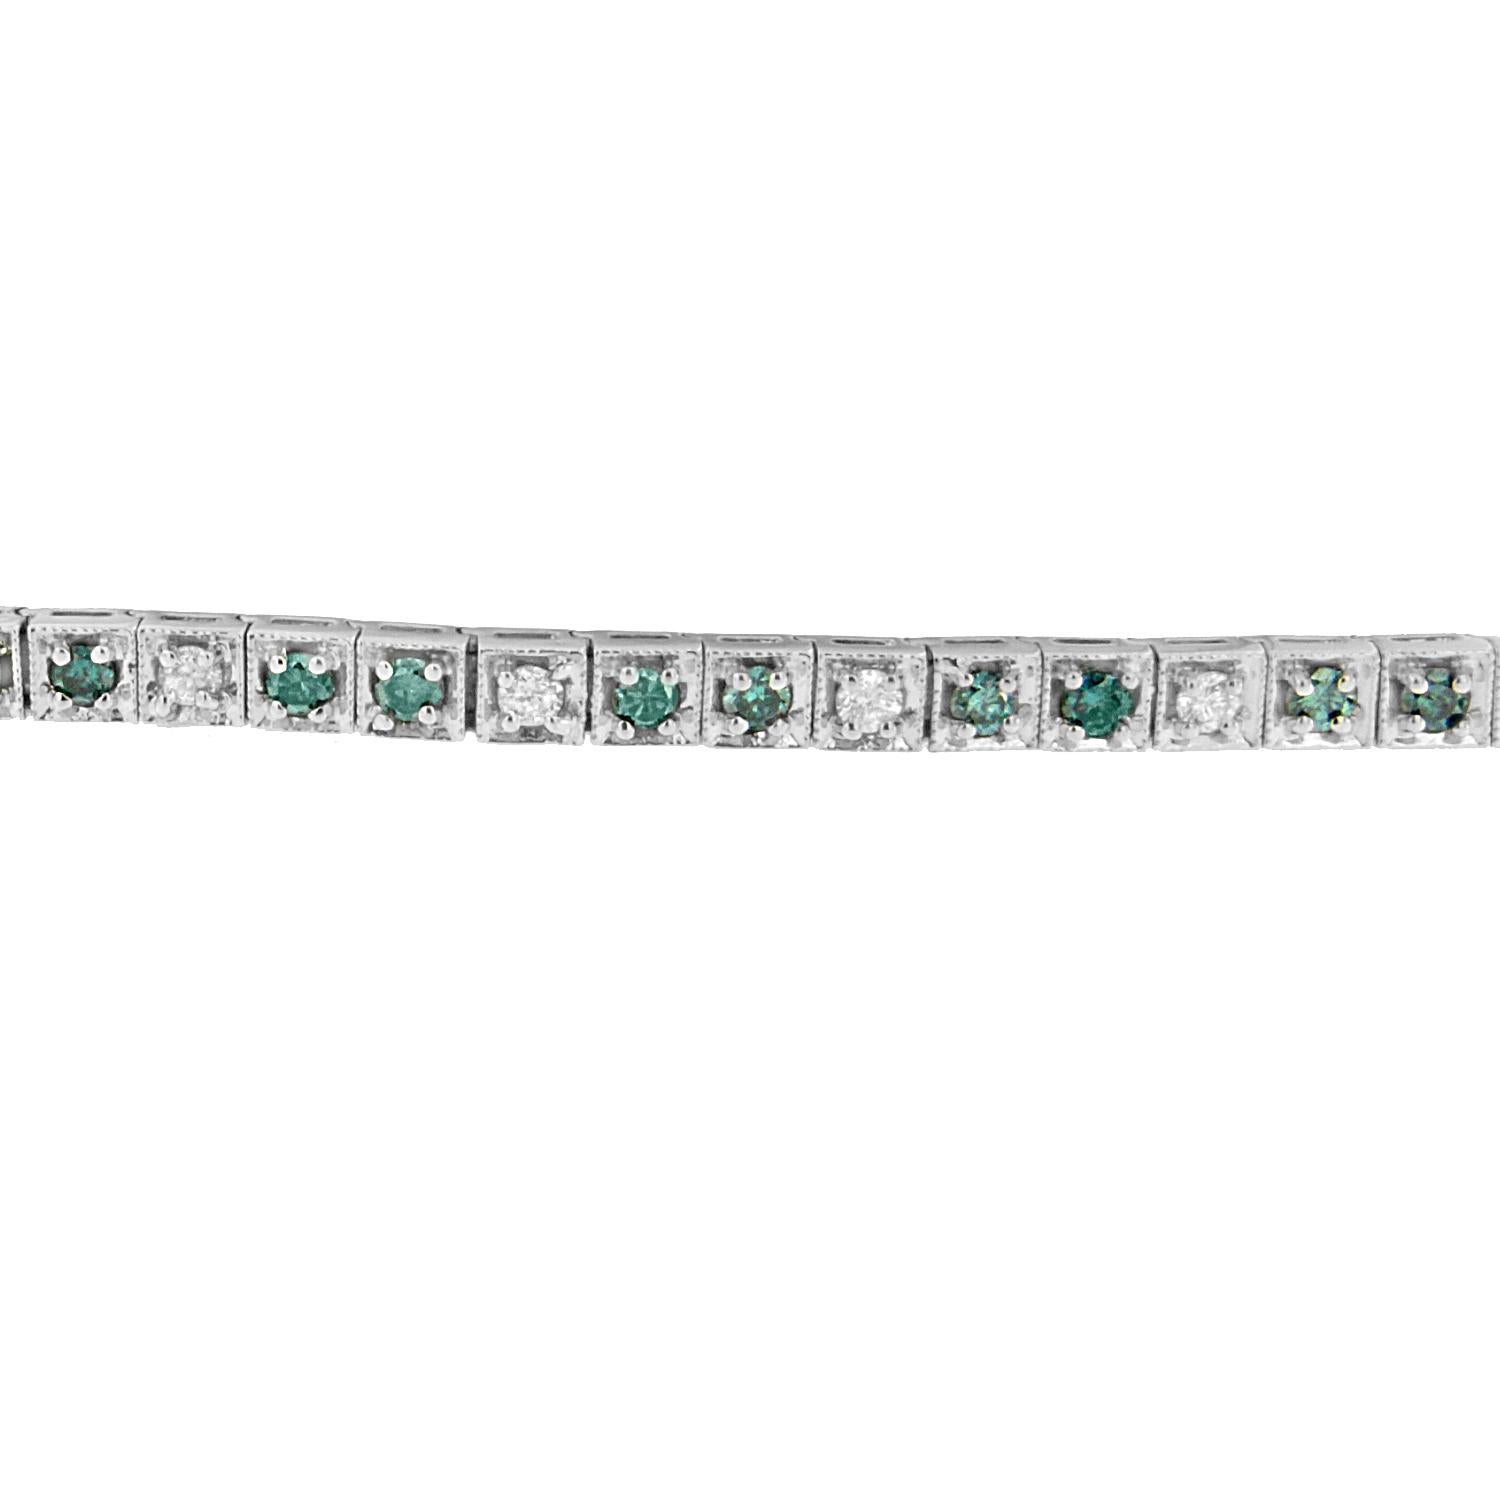 Contemporary 14K White Gold 4 ¾ Carat White and Treated Blue Diamond Tennis Bracelet For Sale